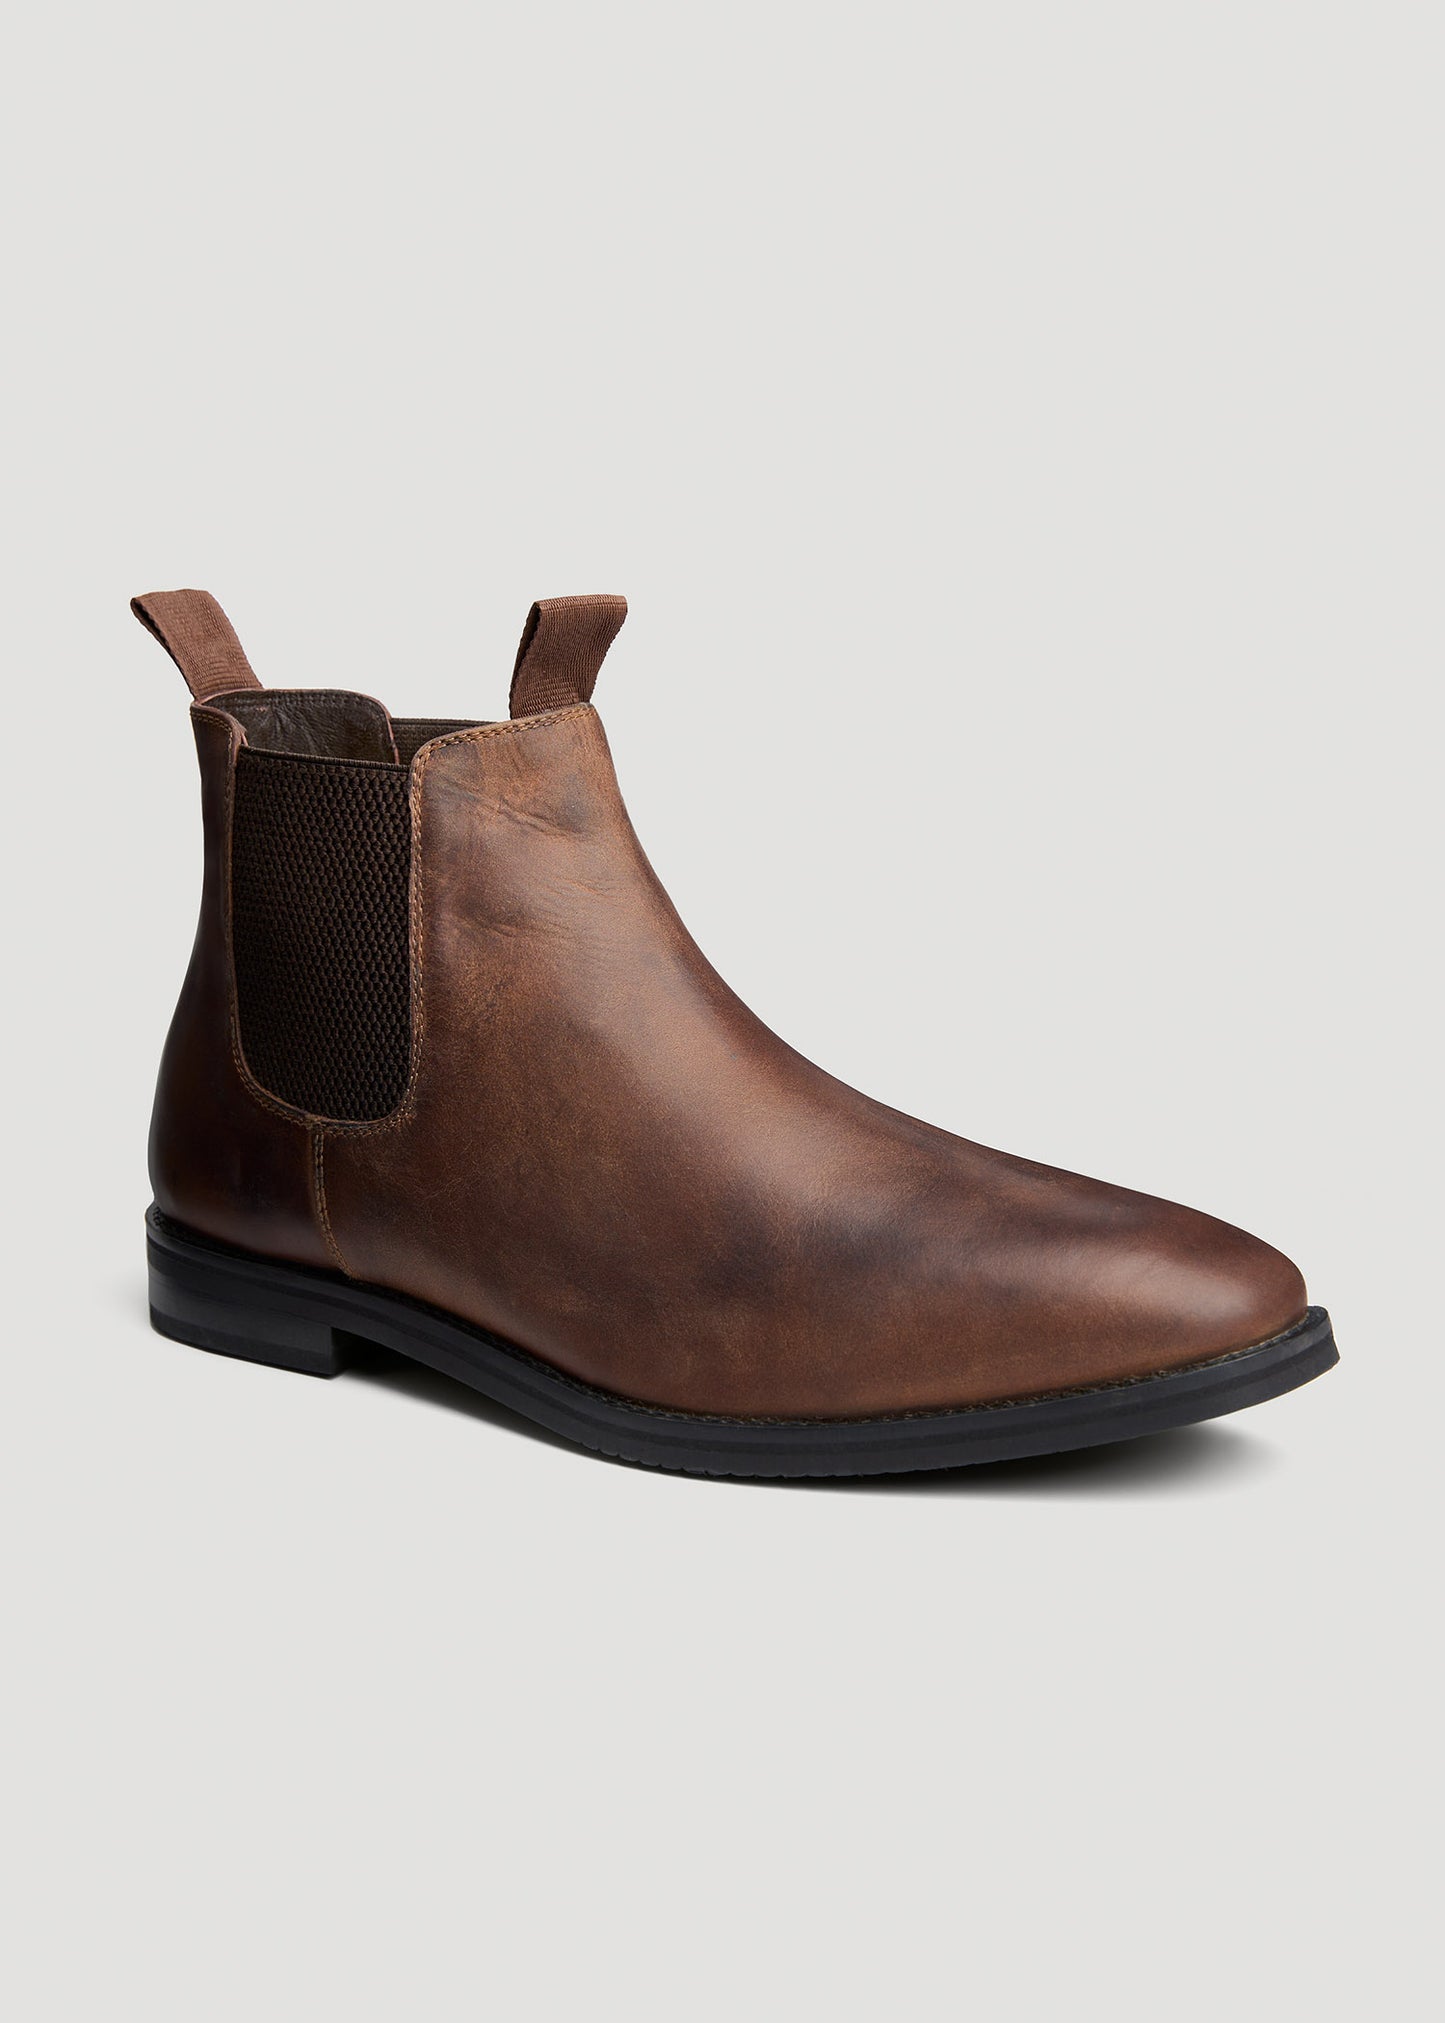    American-Tall-Men-Chelsea-Boots-Dark-Brown-front